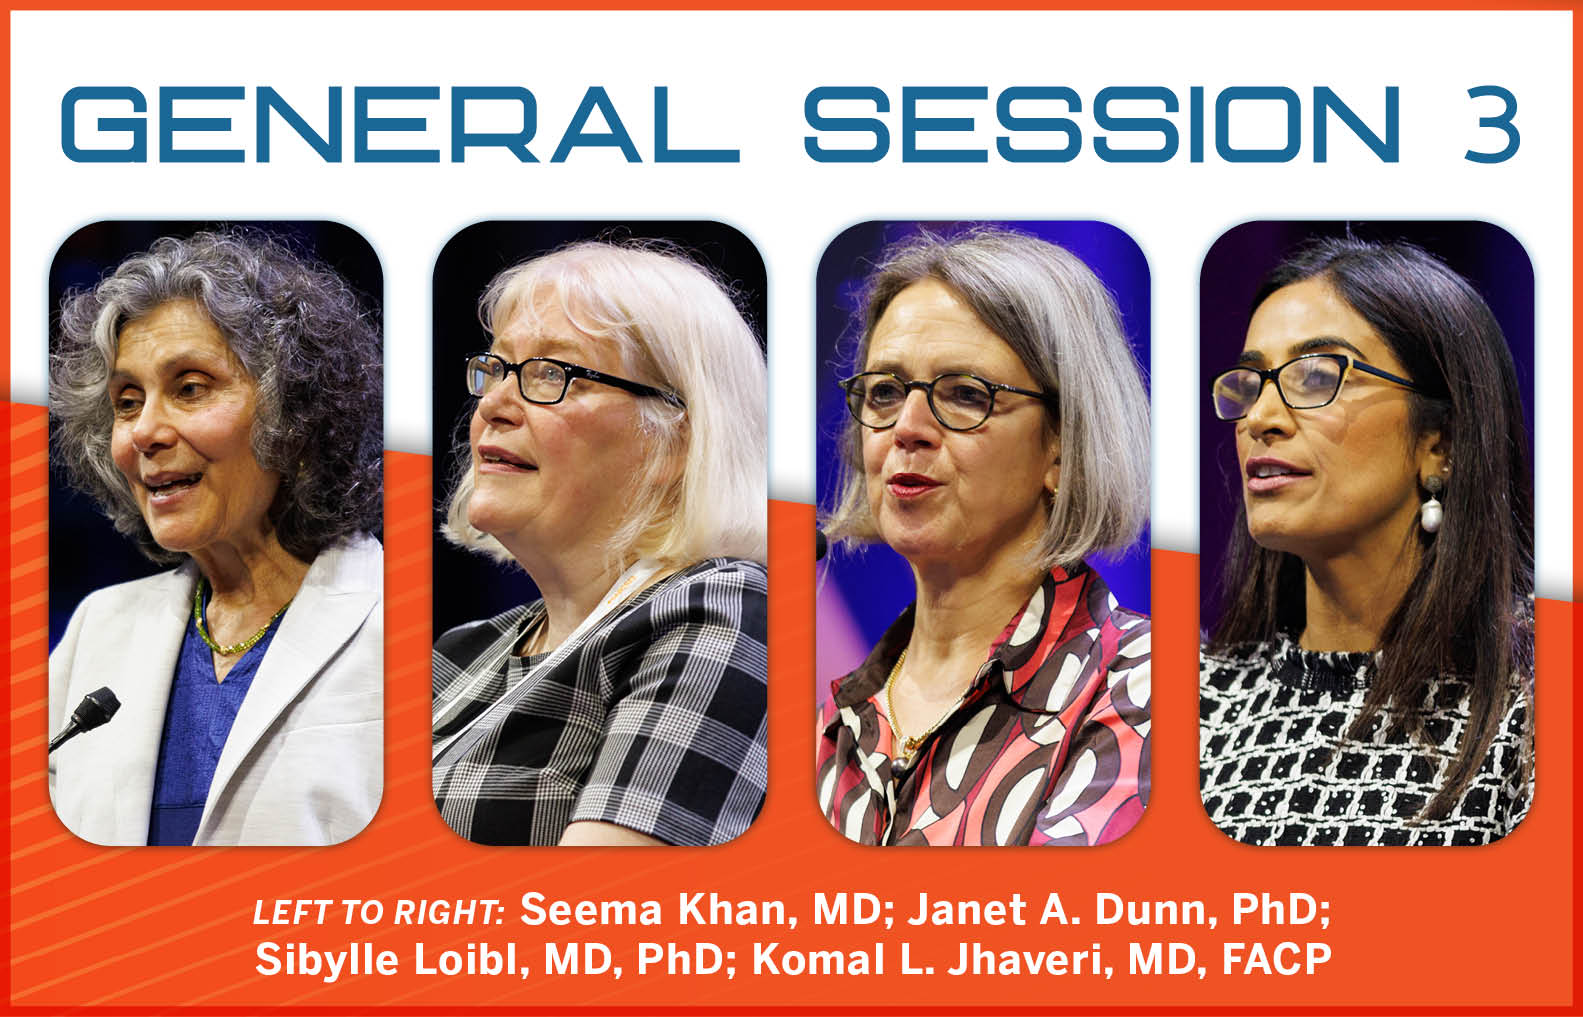 Friday General Session features late-breaking data from KATHERINE and INAVO120 clinical trials